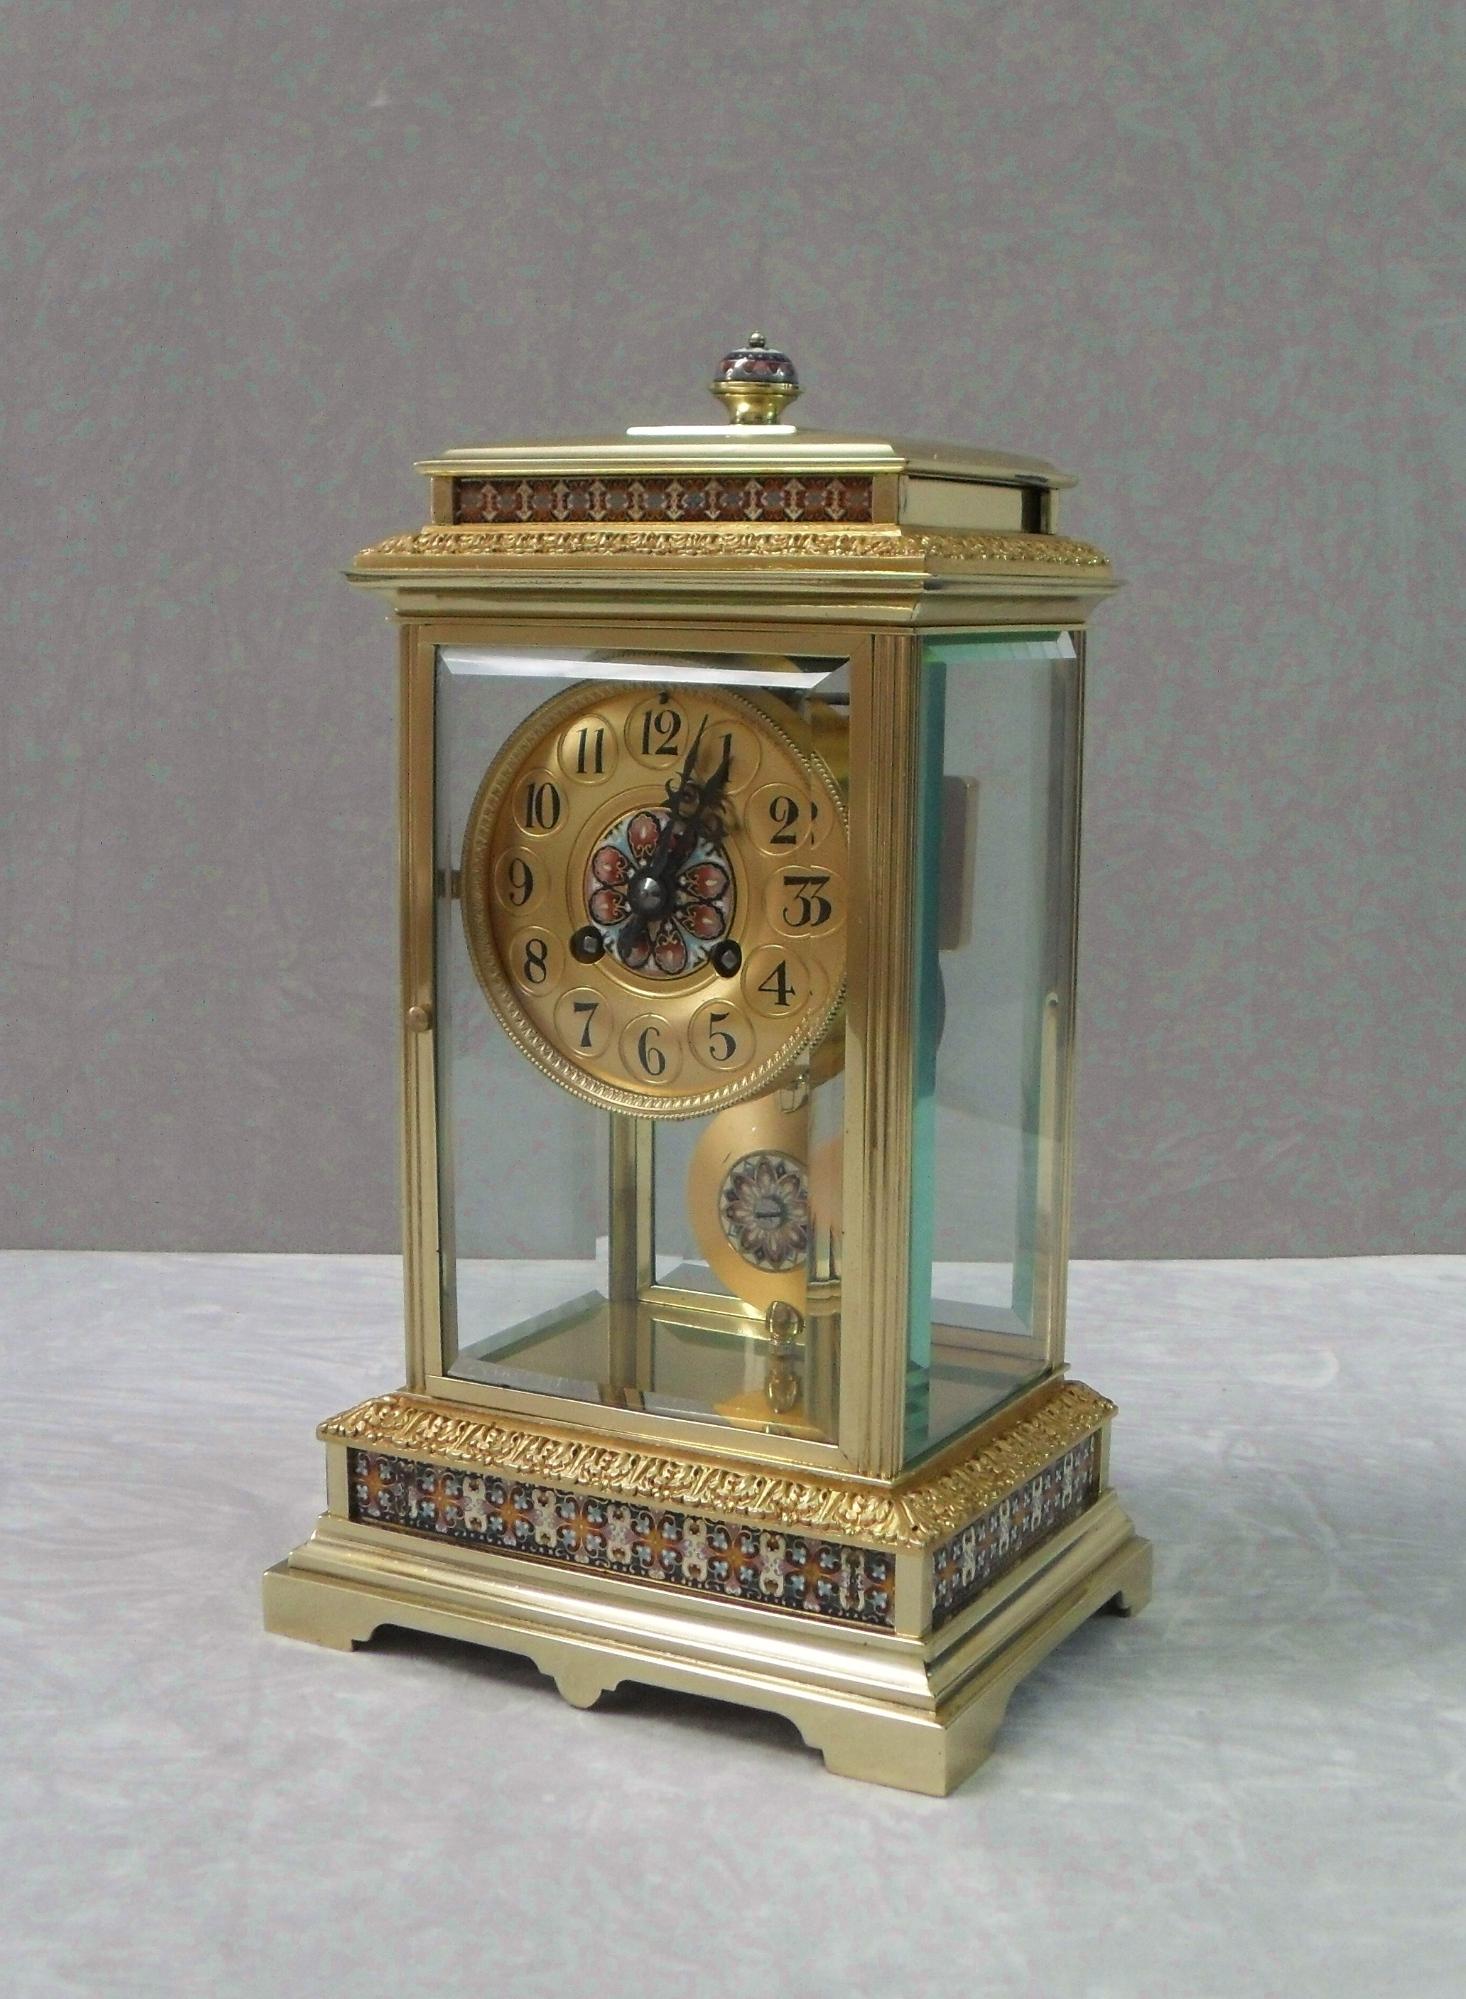 A very good quality French Napoleon III brass four glass mantel clock with reeded corners, acanthus leaf mouldings and decorative champleve coloured enamel ornamentation to the case, pendulum and dial. The clock has a brass dial with a French eight